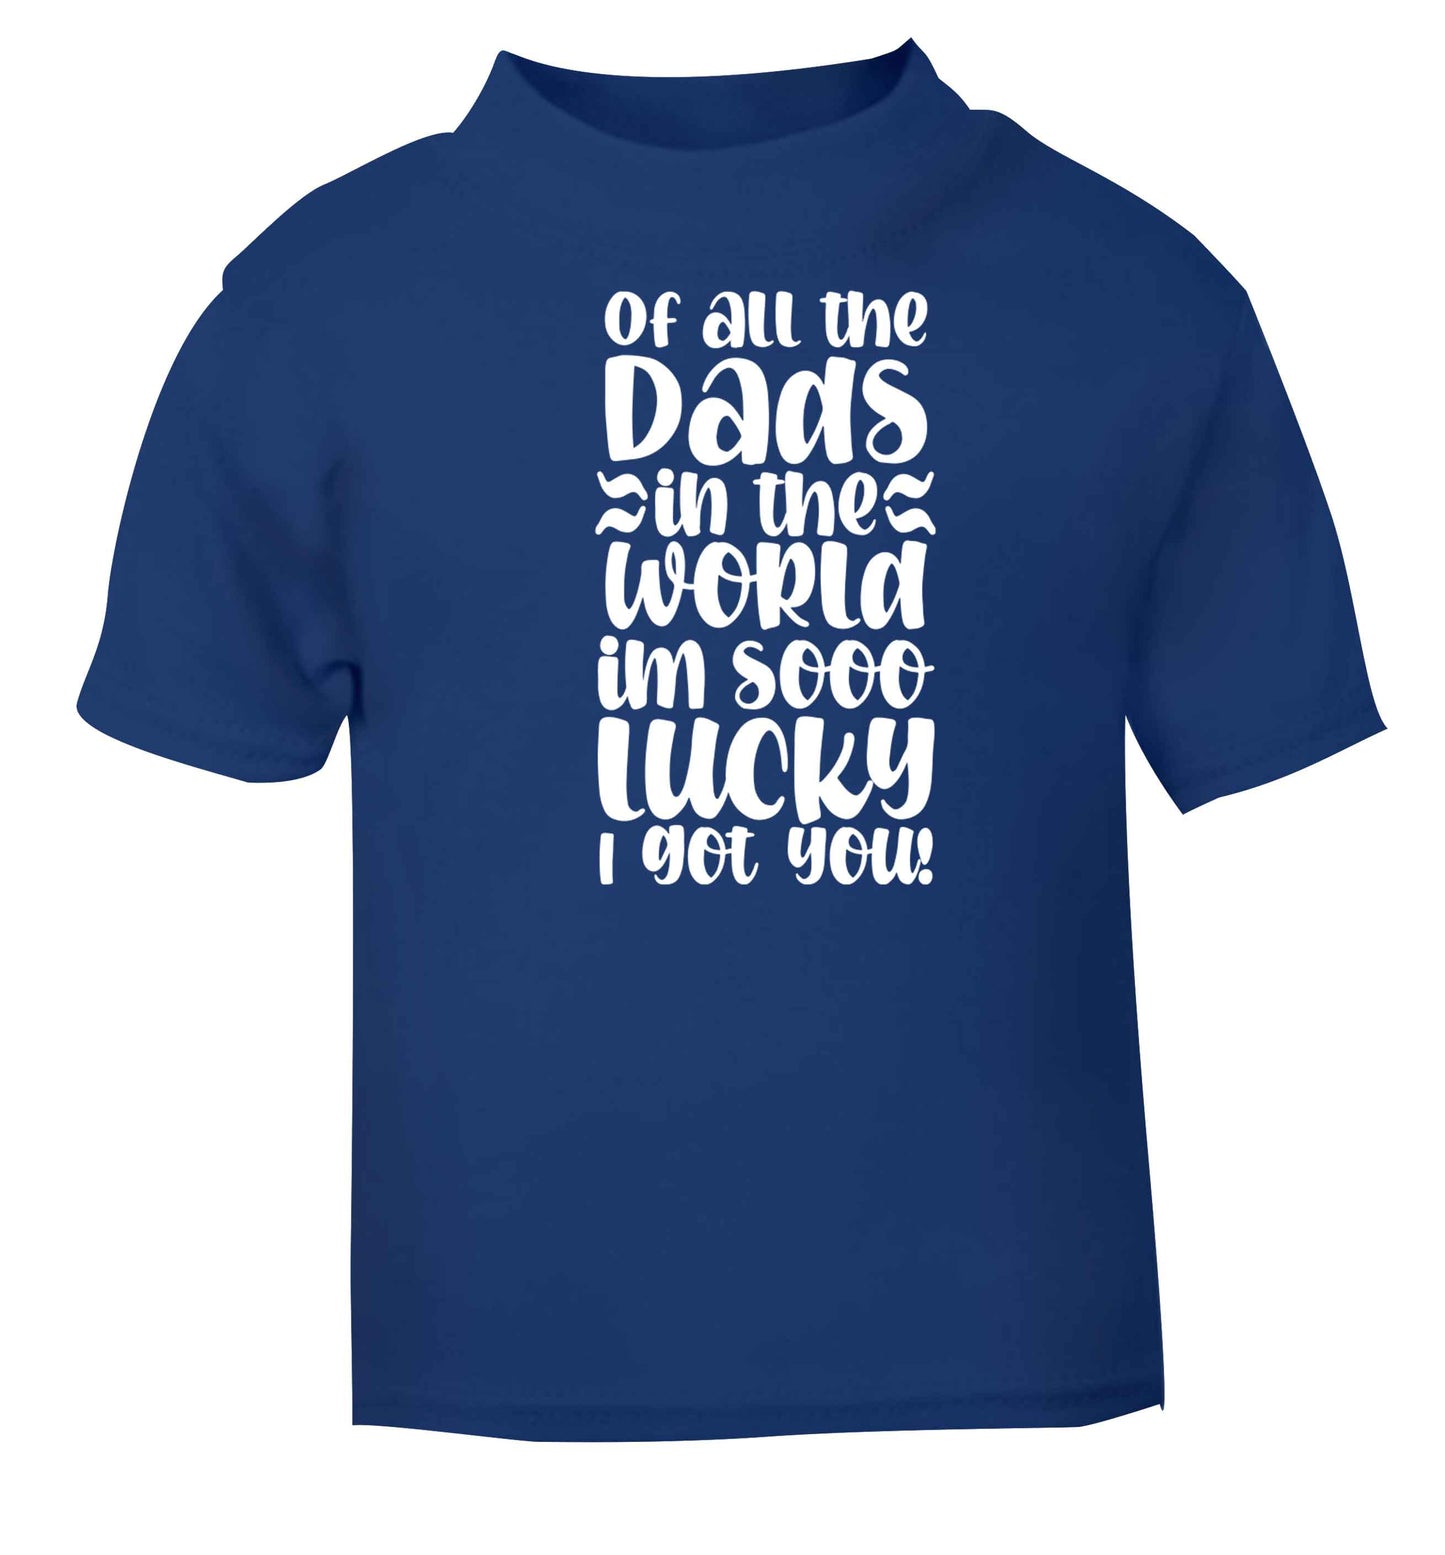 I'm as lucky as can be the worlds greatest dad belongs to me! blue baby toddler Tshirt 2 Years